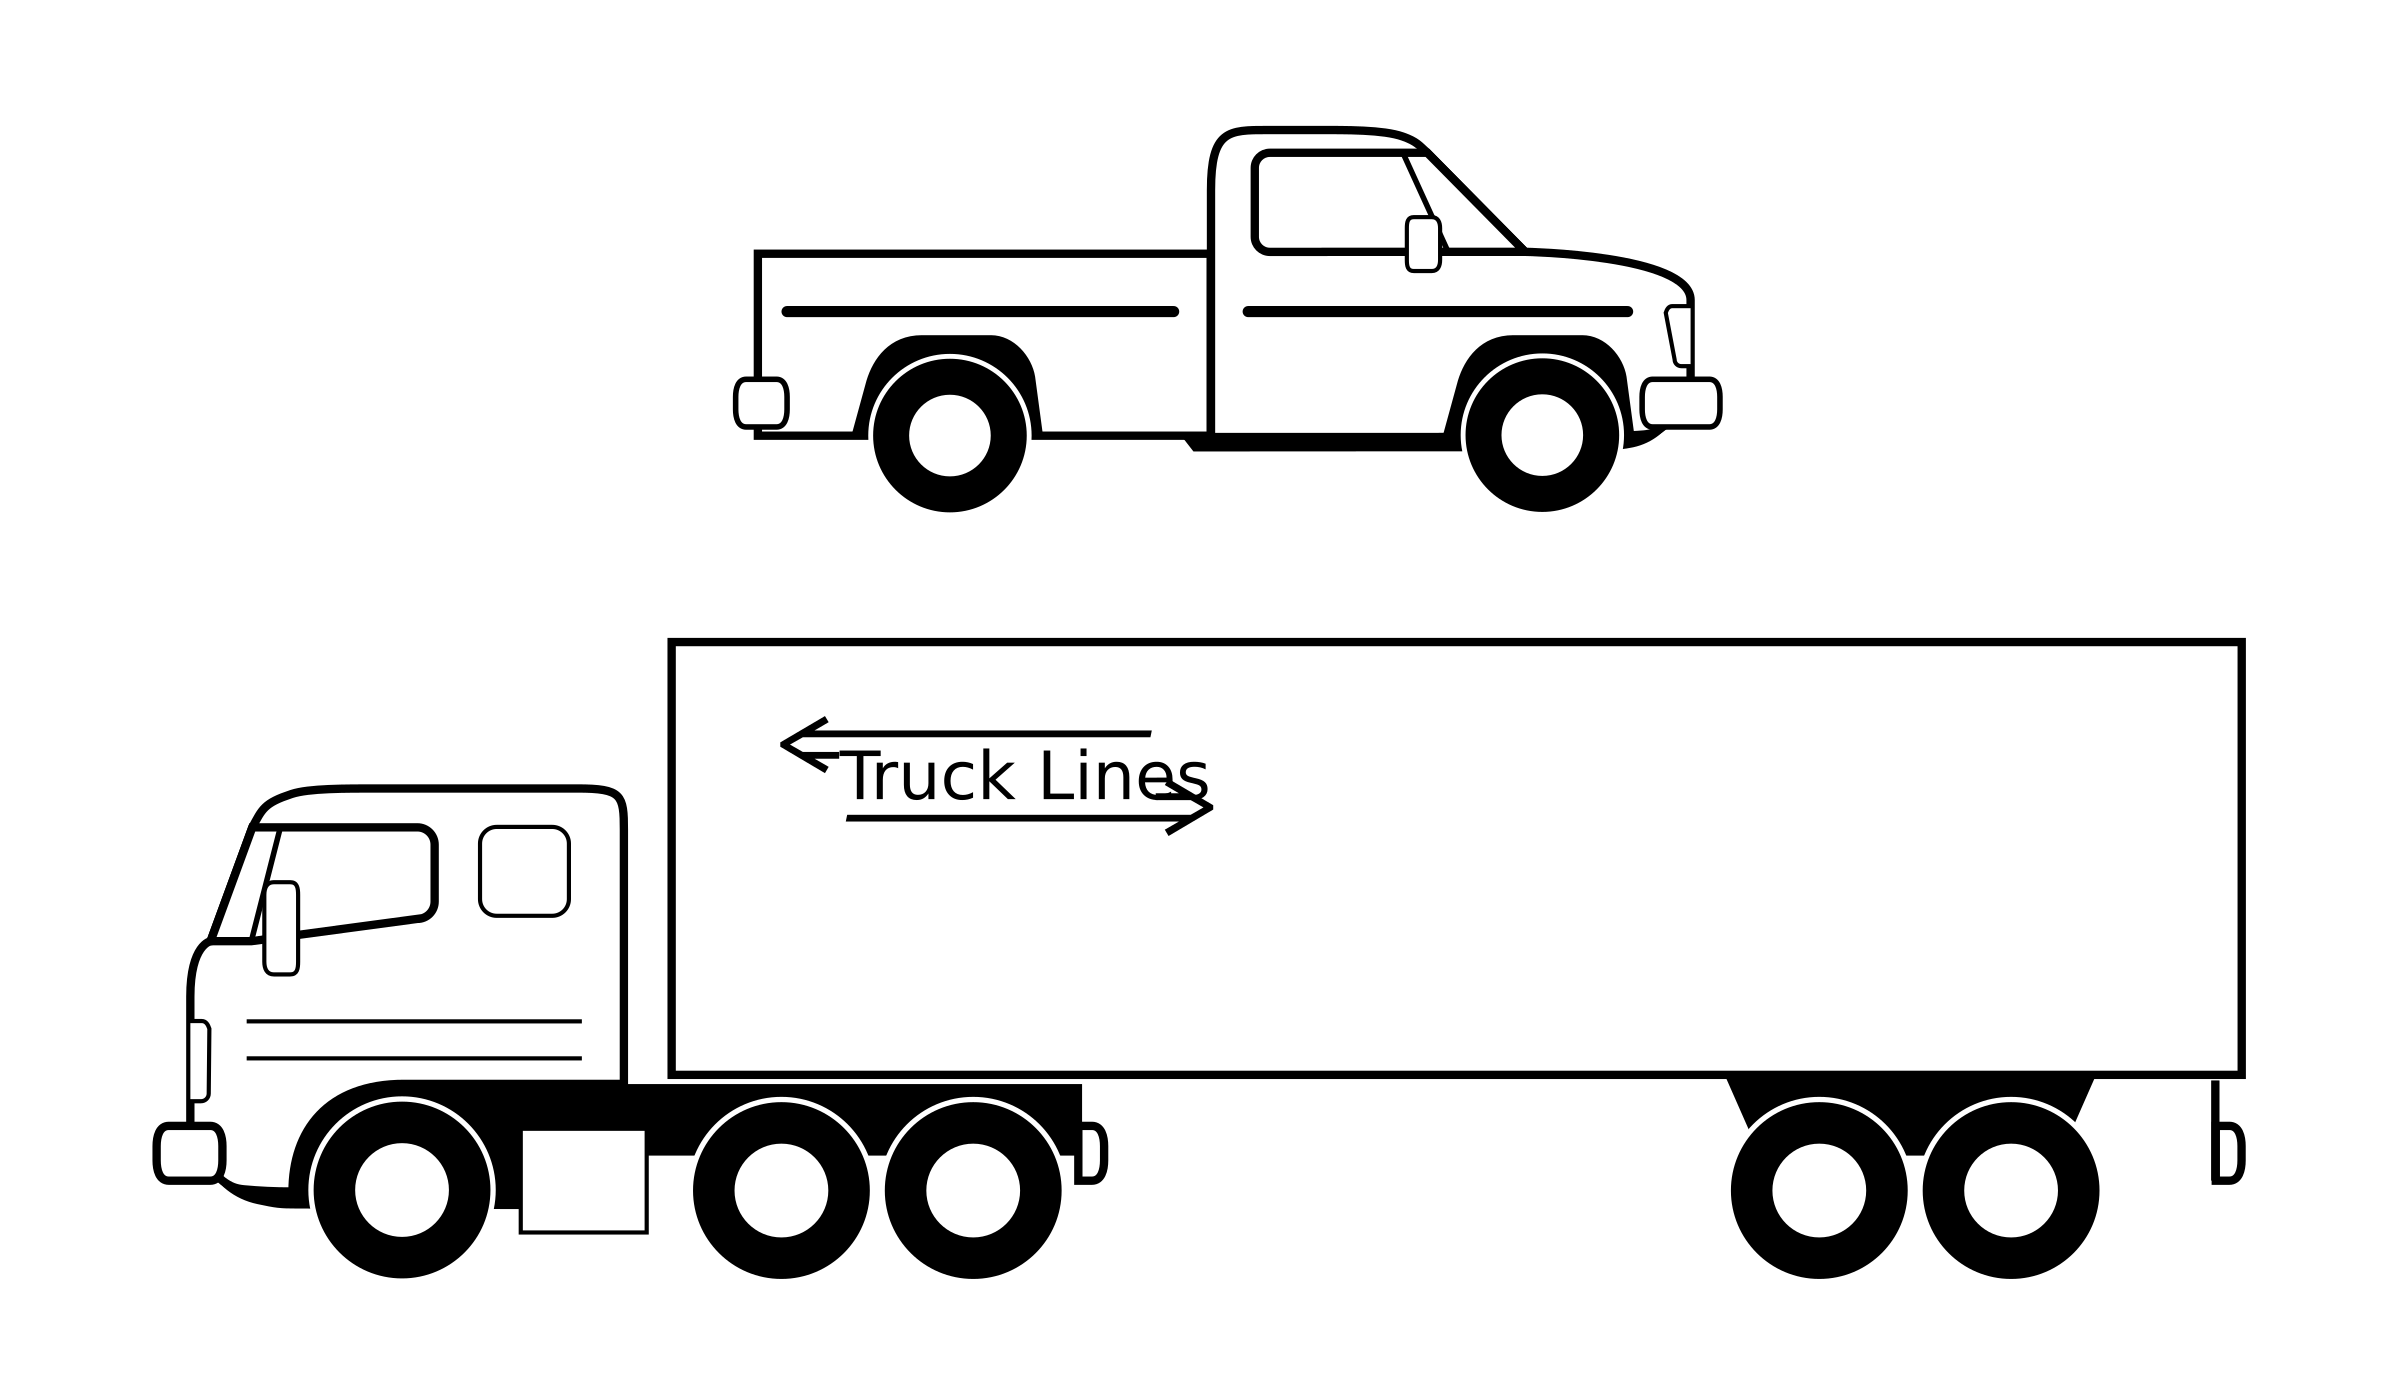 Semi truck clipart black and  - Truck Clipart Black And White